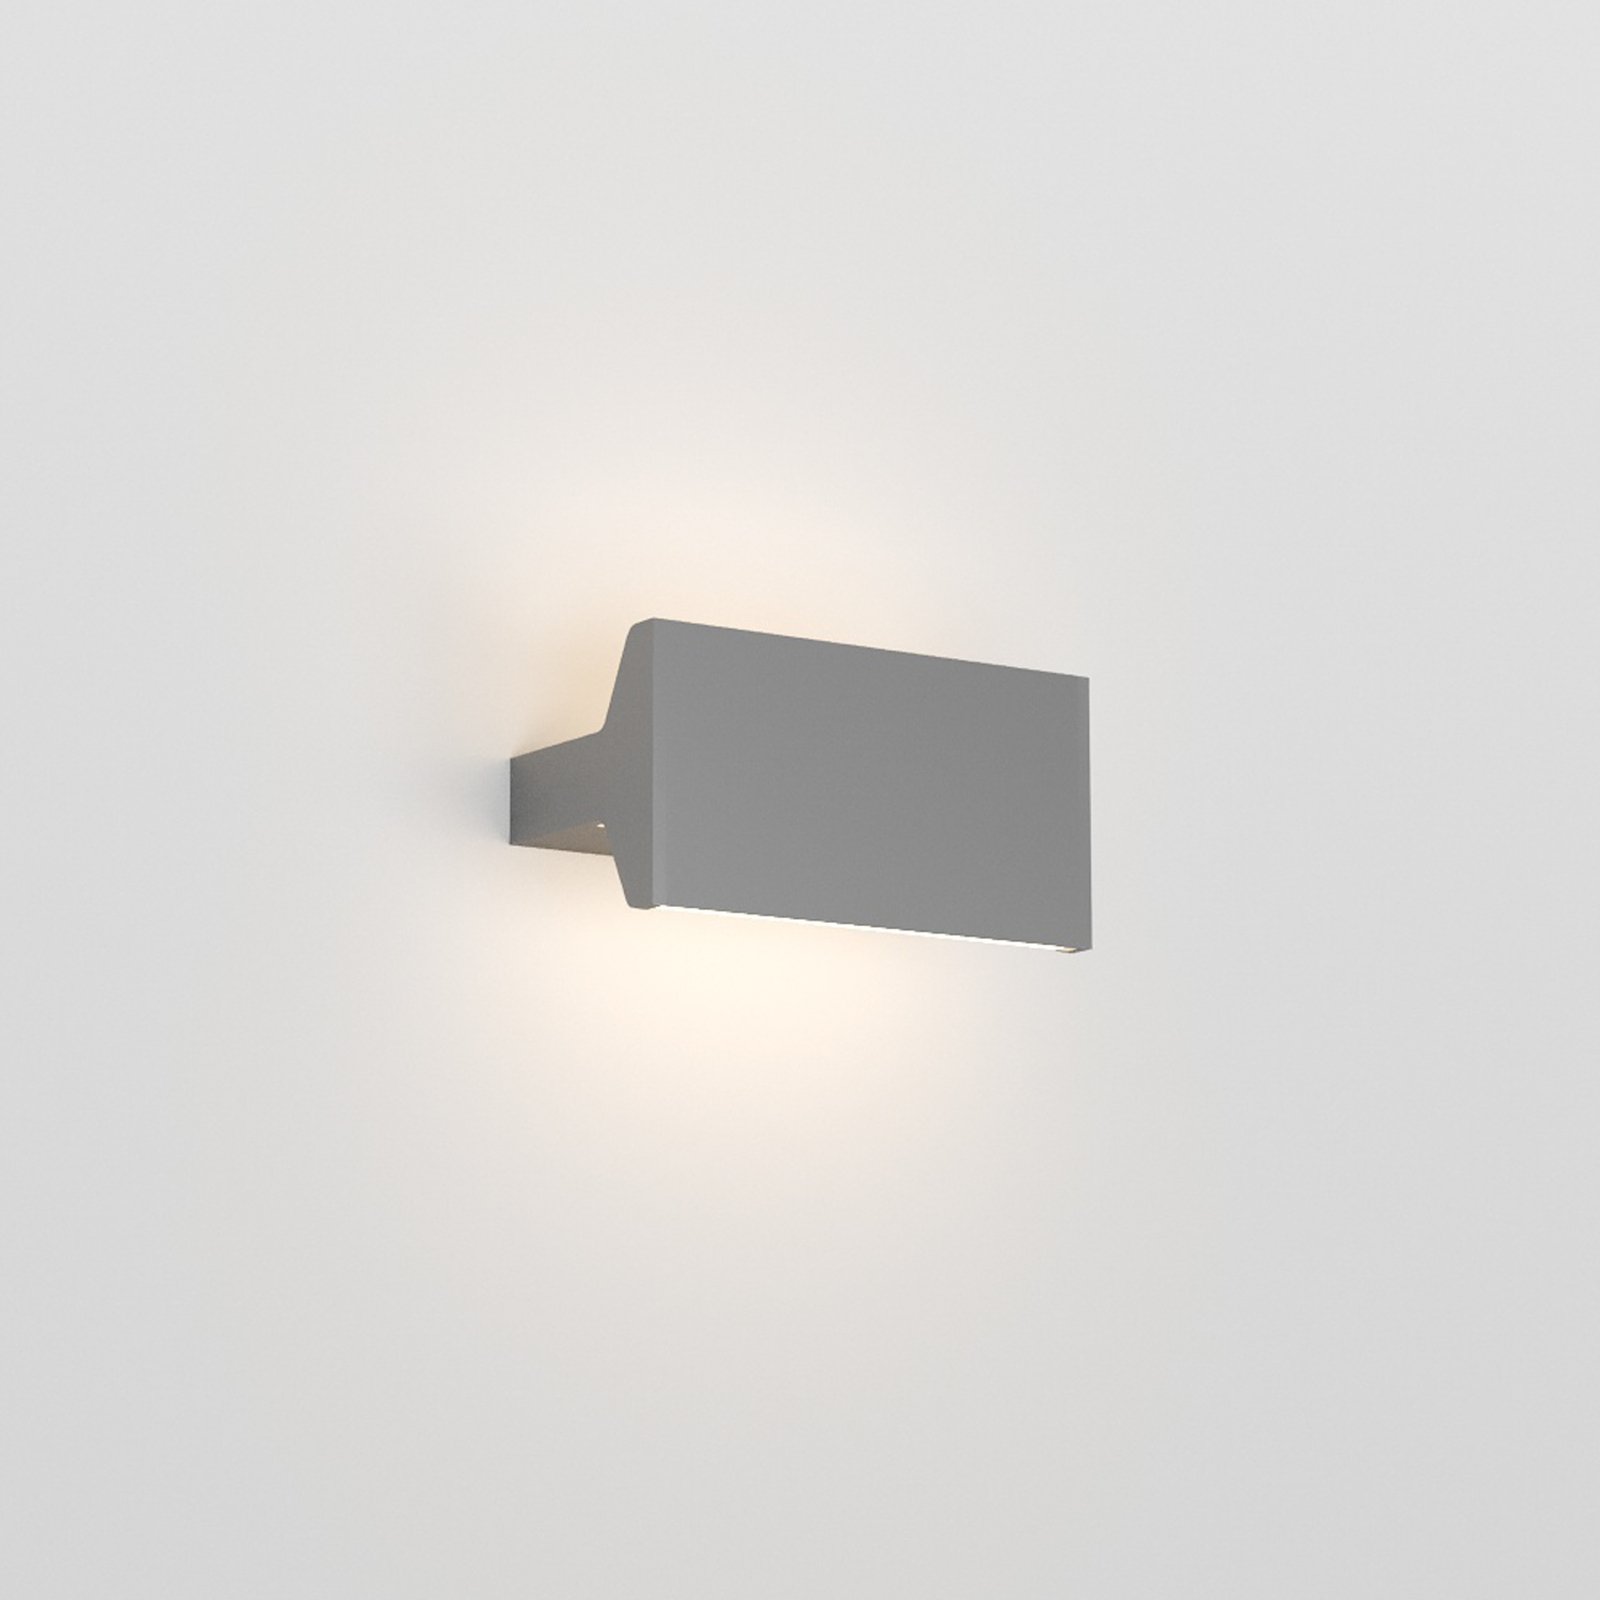 Rotaliana Ipe W1 phase dimmable 2,700 K graphite